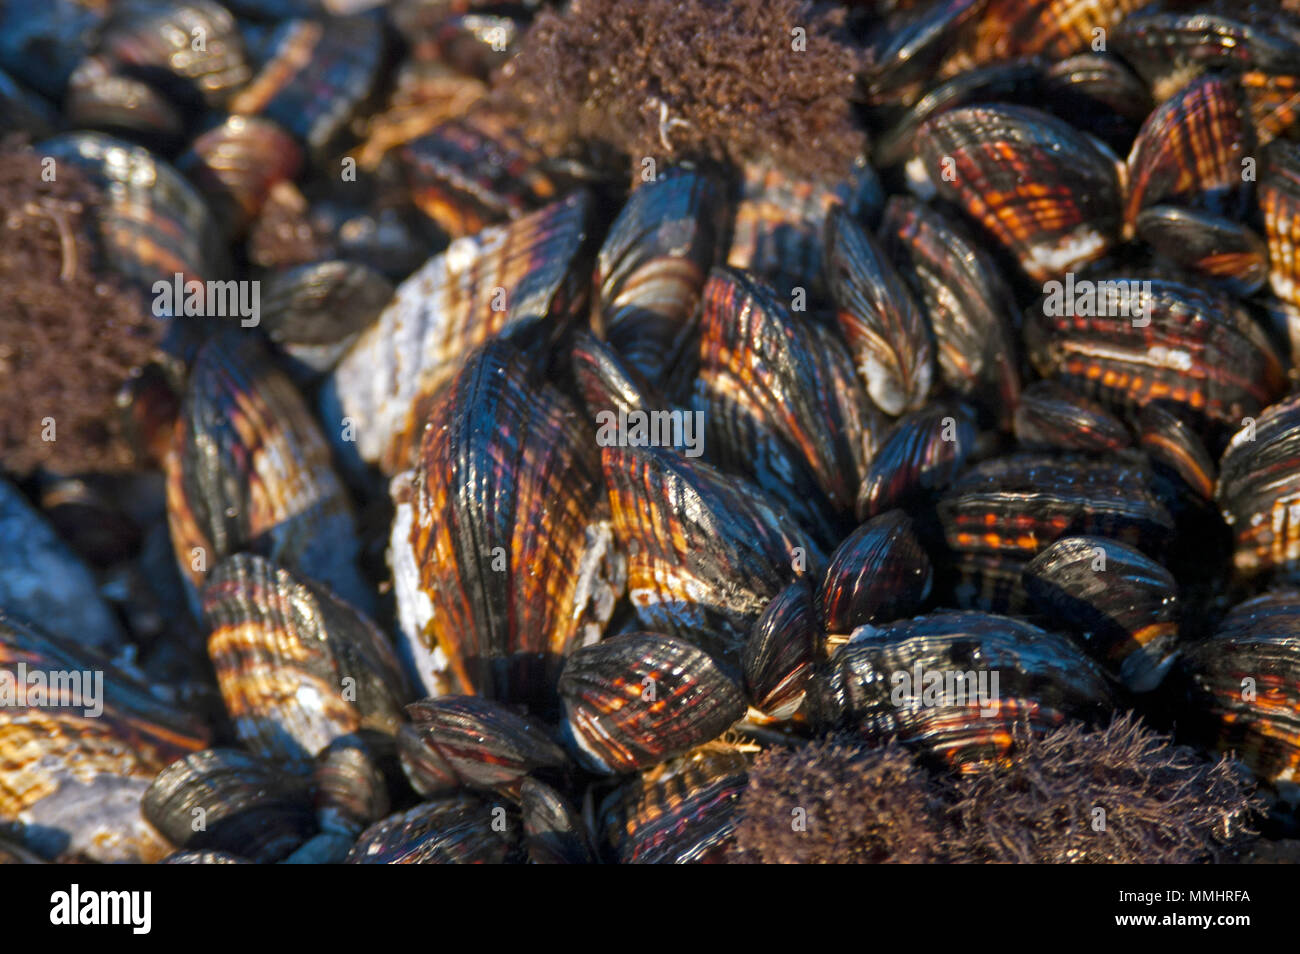 California mussels, Mytilus californianus, encrusted on a rock at Lone Ranch Beach, Oregon, USA Stock Photo